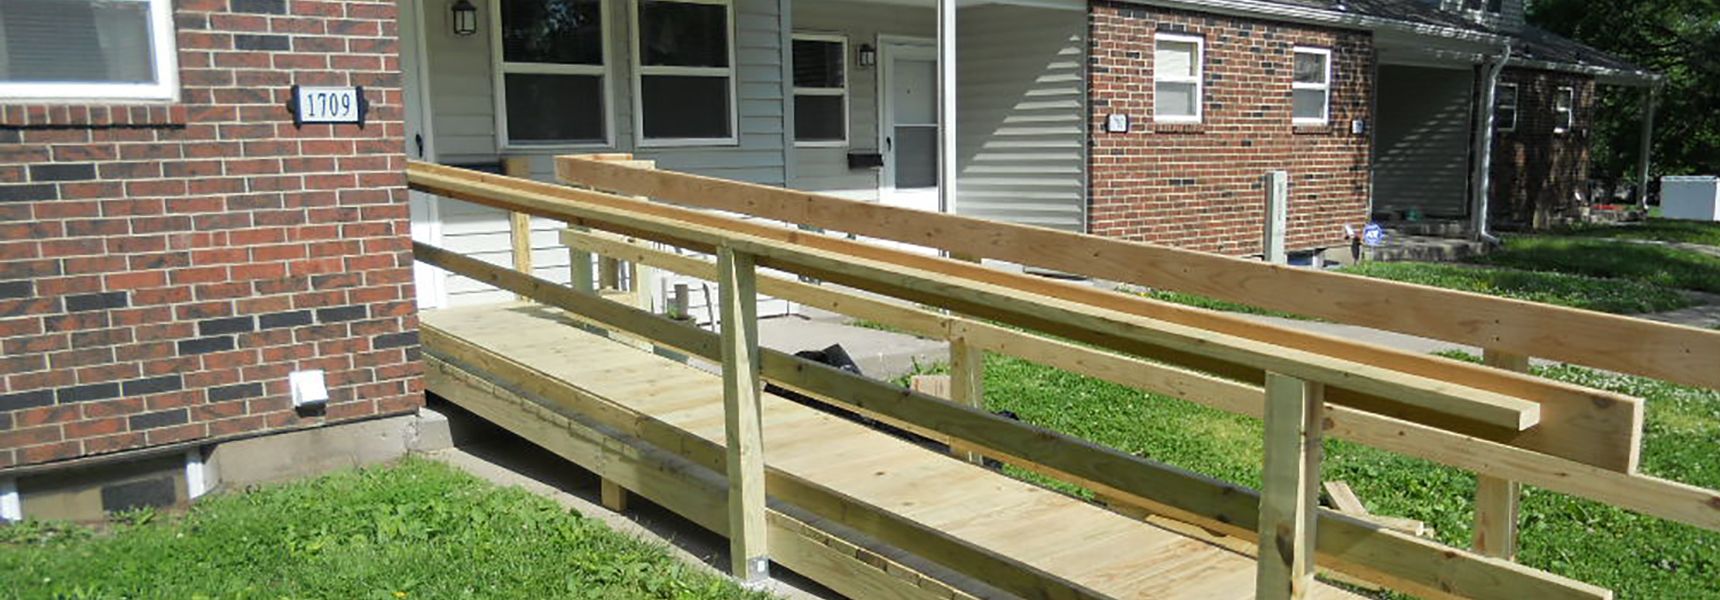 Newly built ramp to front of house